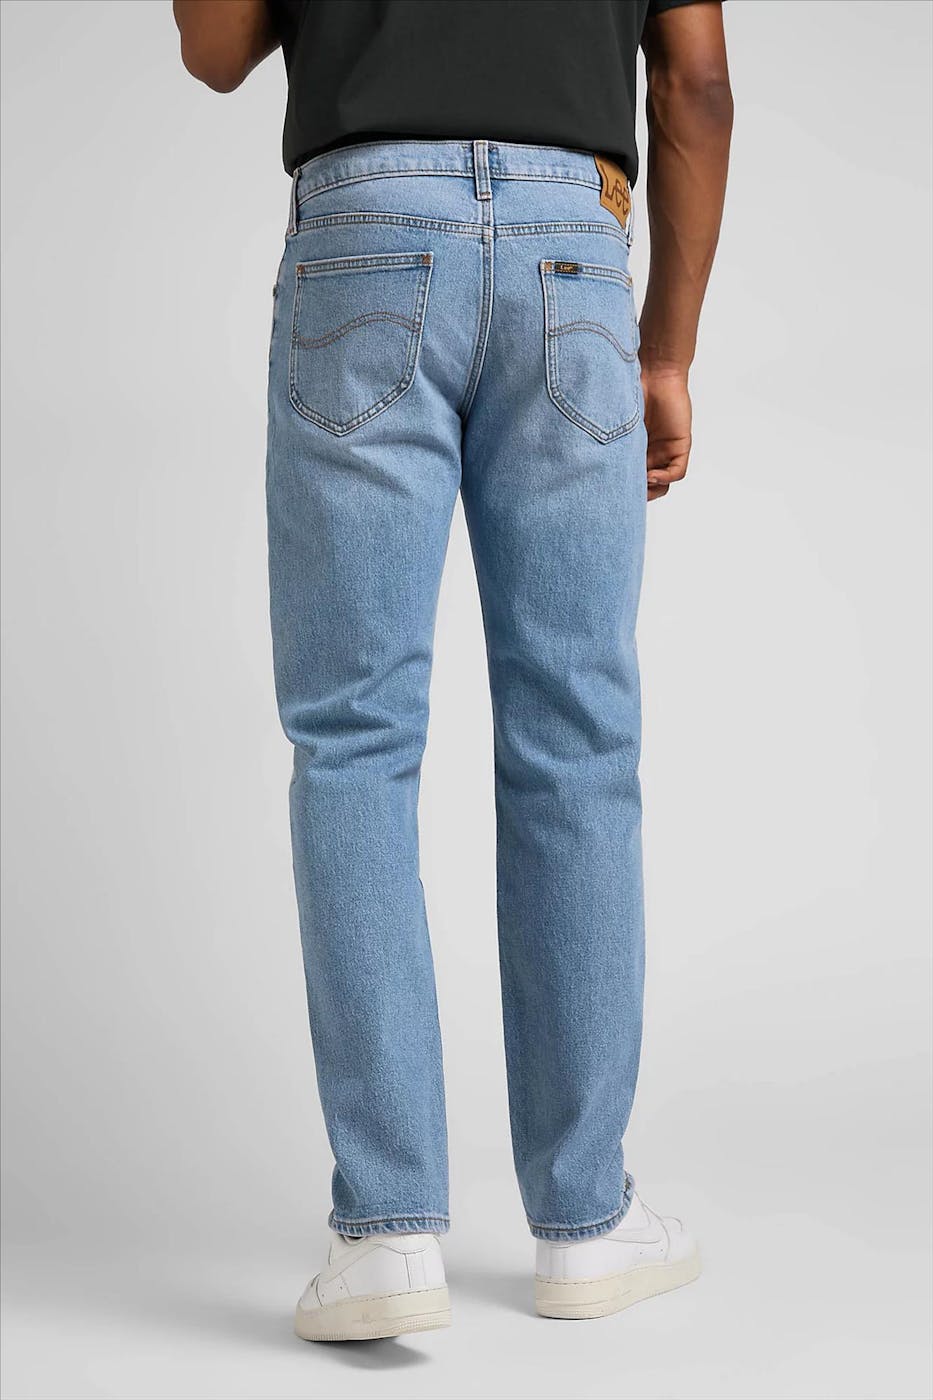 Lee - Blauwe West Relaxed jeans